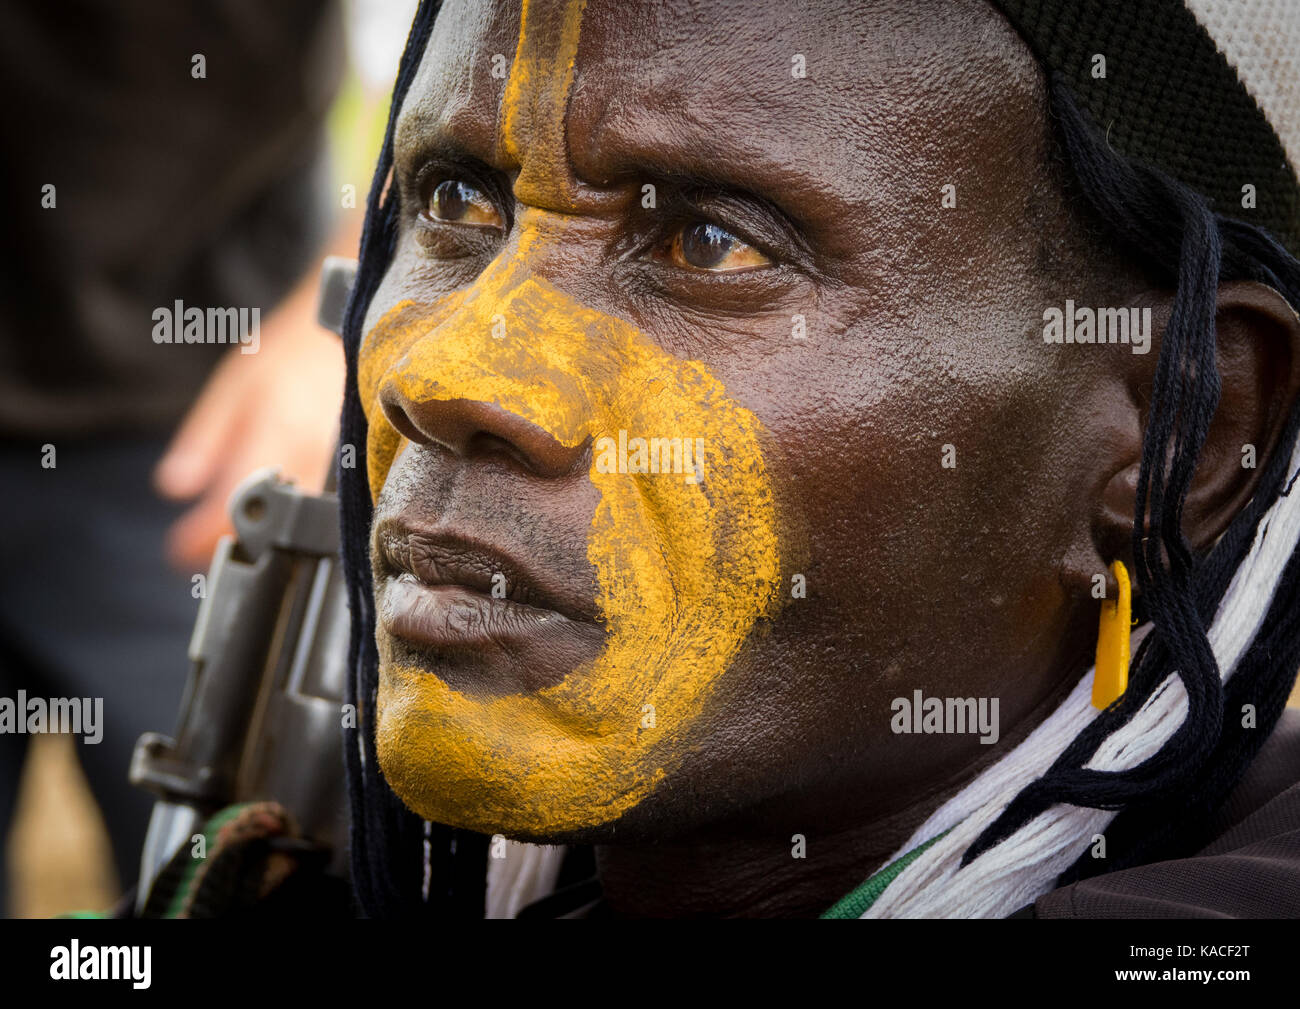 Man with make up attending Kael, fat men ceremony at Bodi tribe, Gurra, Omo Valley, Ethiopia Stock Photo